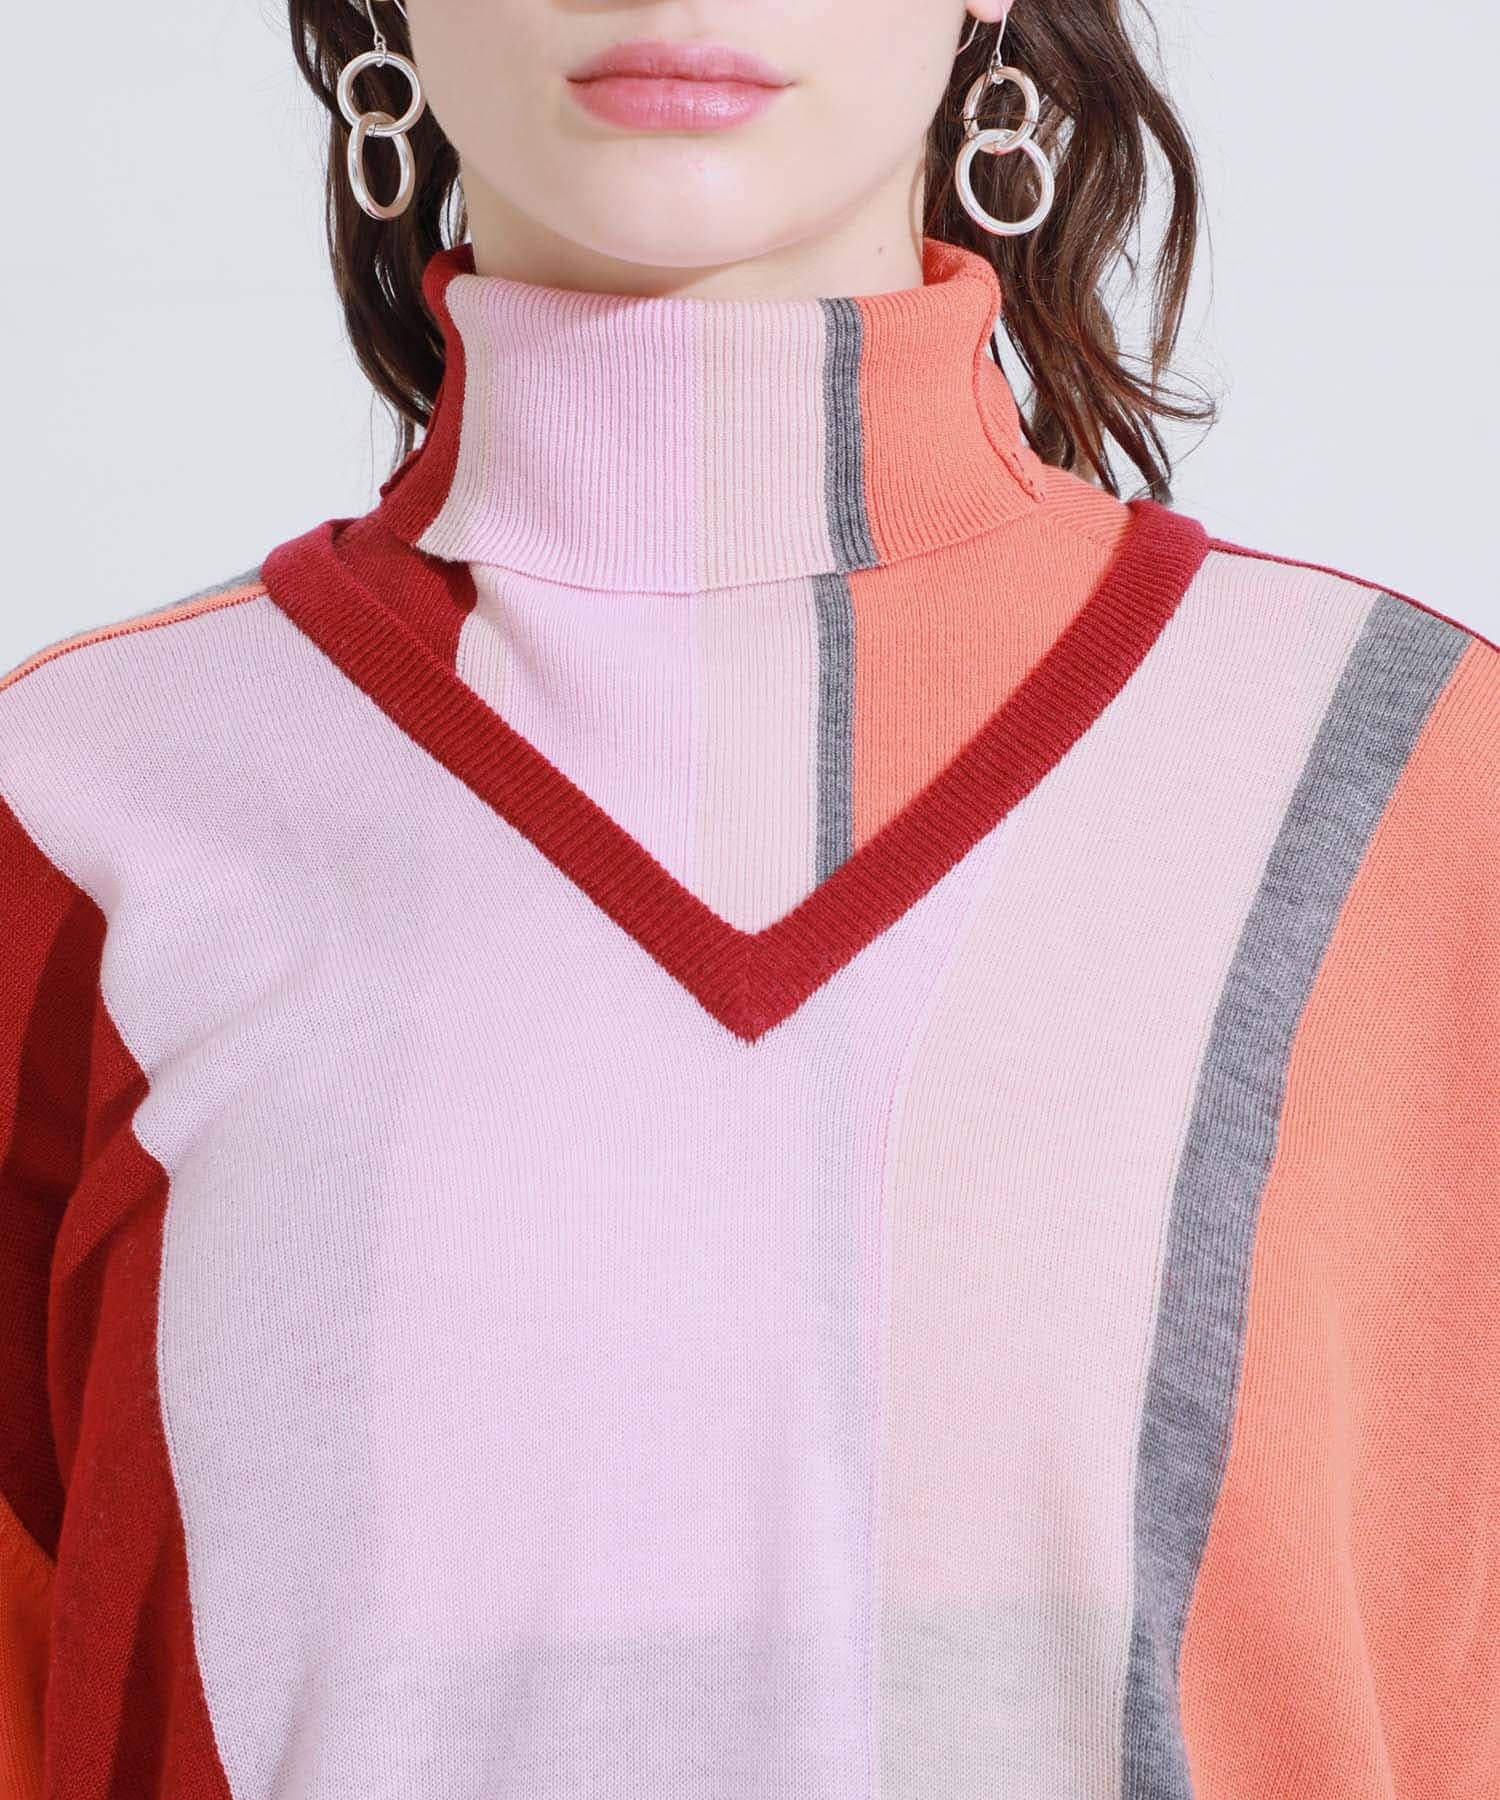 Stripe knit with high neck TOGA PULLA